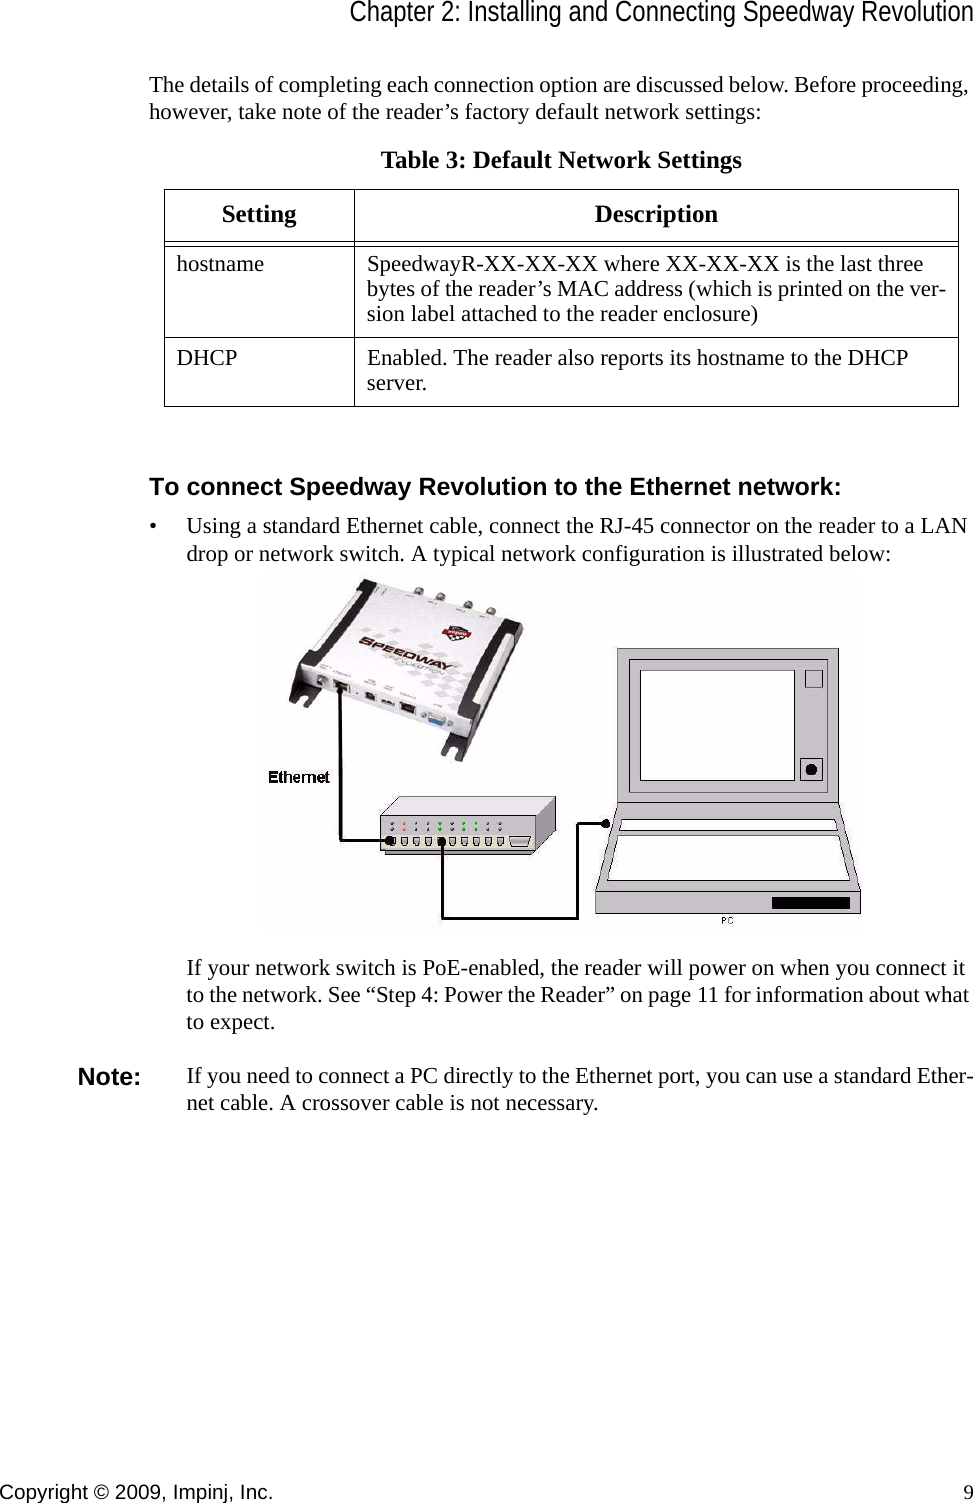 Chapter 2: Installing and Connecting Speedway RevolutionCopyright © 2009, Impinj, Inc. 9The details of completing each connection option are discussed below. Before proceeding, however, take note of the reader’s factory default network settings:To connect Speedway Revolution to the Ethernet network:• Using a standard Ethernet cable, connect the RJ-45 connector on the reader to a LAN drop or network switch. A typical network configuration is illustrated below:If your network switch is PoE-enabled, the reader will power on when you connect it to the network. See “Step 4: Power the Reader” on page 11 for information about what to expect.Note: If you need to connect a PC directly to the Ethernet port, you can use a standard Ether-net cable. A crossover cable is not necessary.Table 3: Default Network SettingsSetting Descriptionhostname SpeedwayR-XX-XX-XX where XX-XX-XX is the last three bytes of the reader’s MAC address (which is printed on the ver-sion label attached to the reader enclosure)DHCP Enabled. The reader also reports its hostname to the DHCP server.